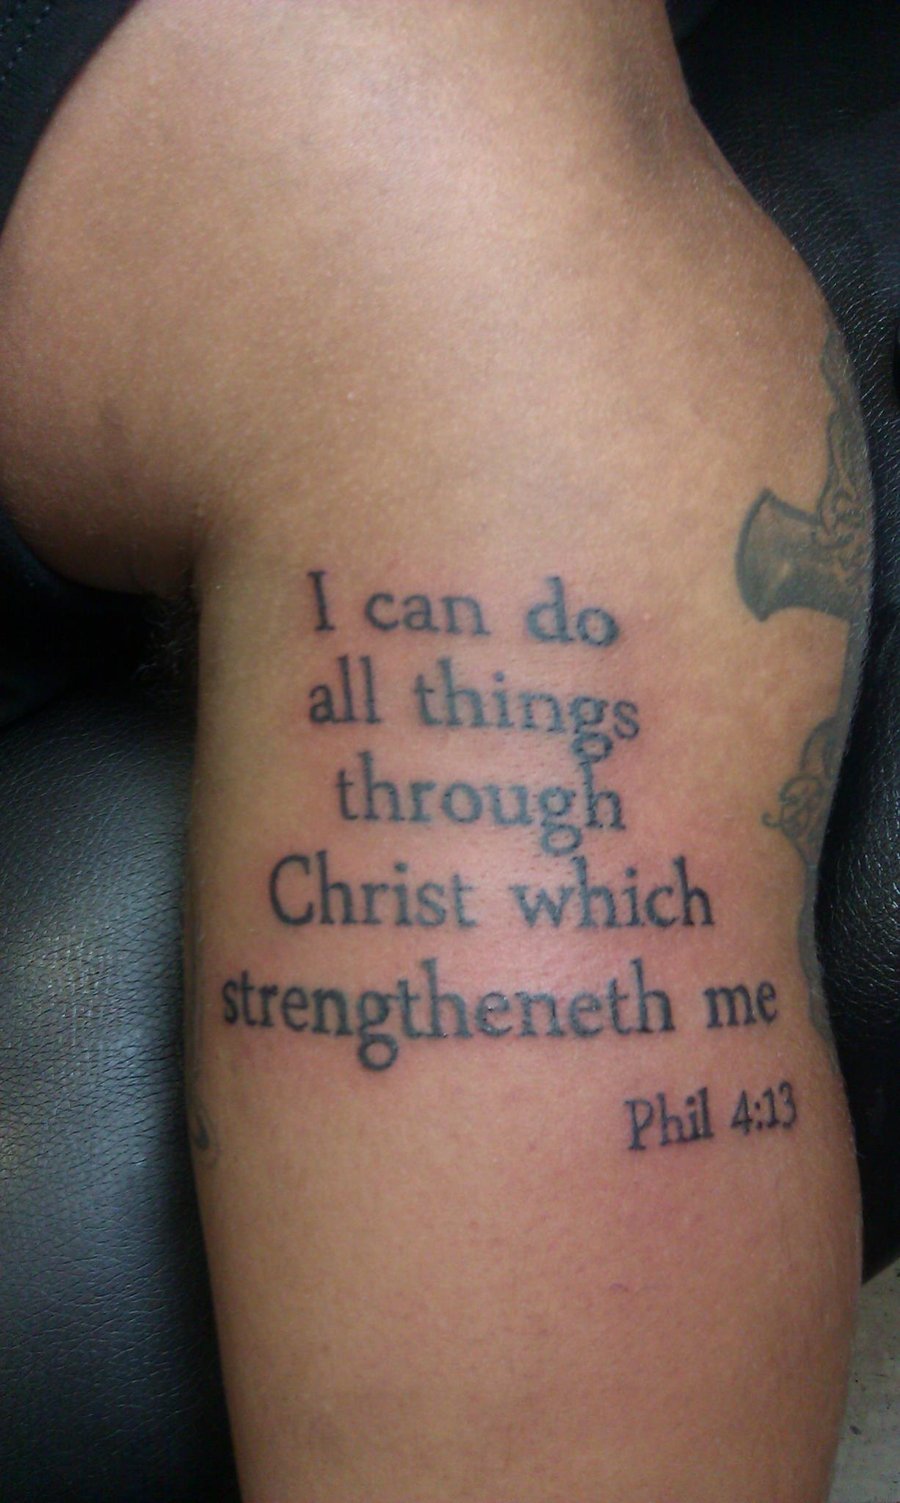 Bible Verse Tattoos Designs, Ideas and Meaning | Tattoos For You